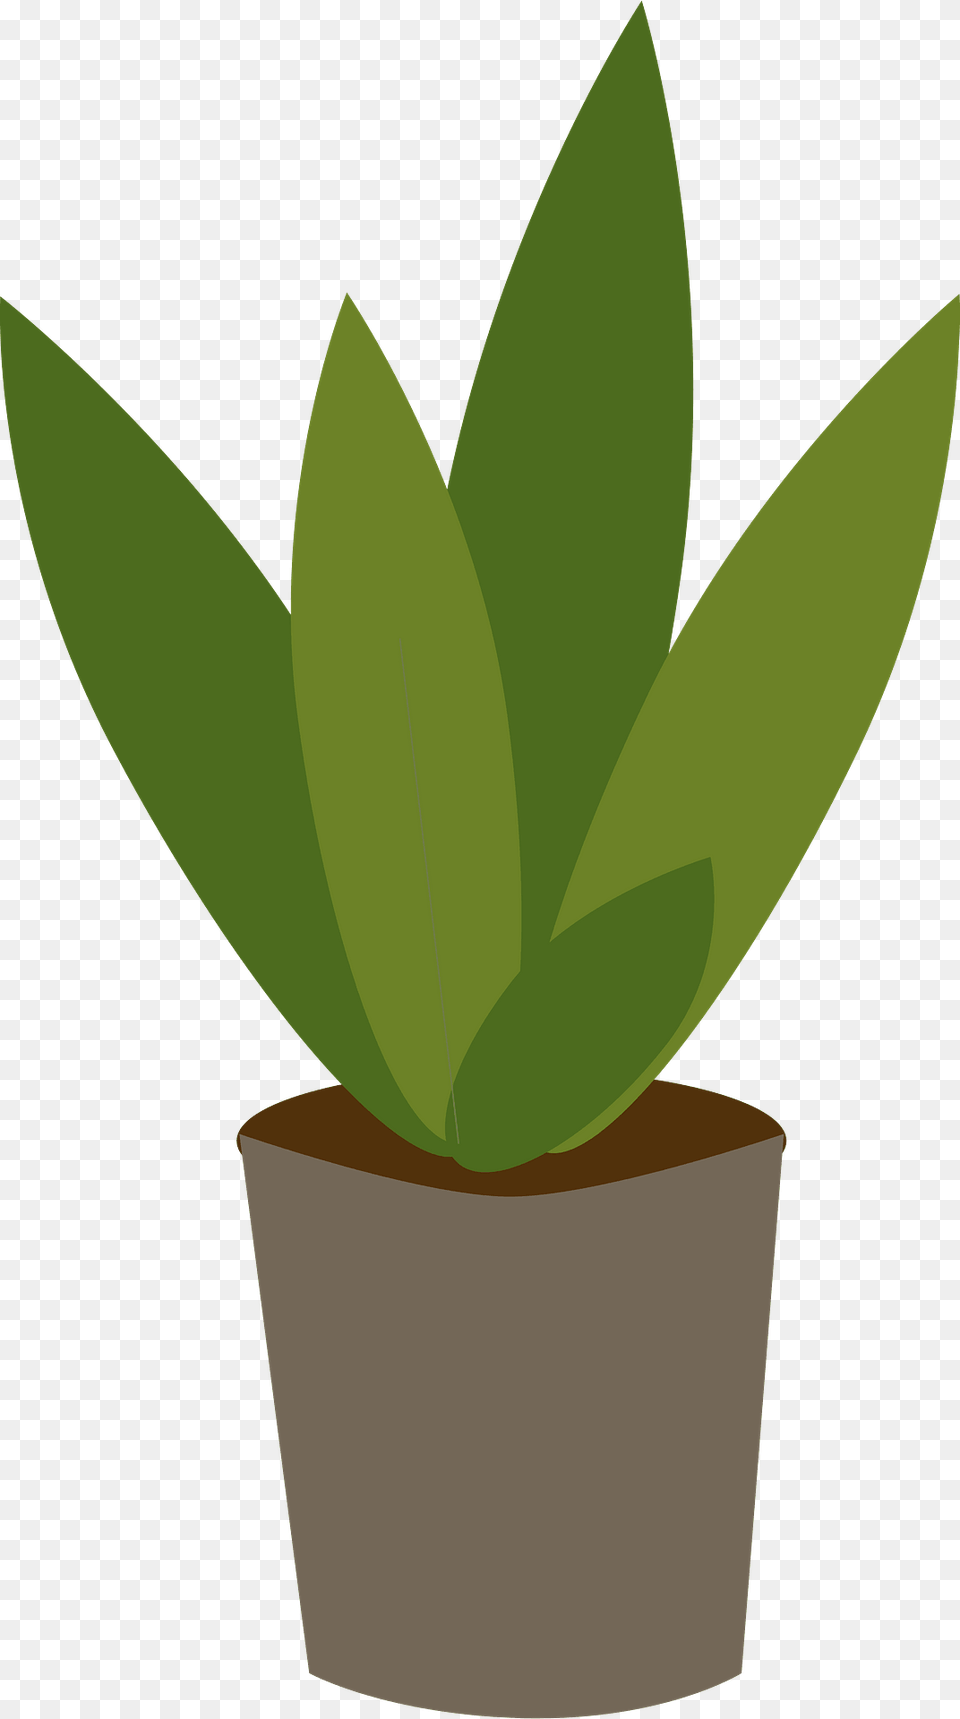 Potted Plant Clipart, Leaf, Potted Plant Png Image